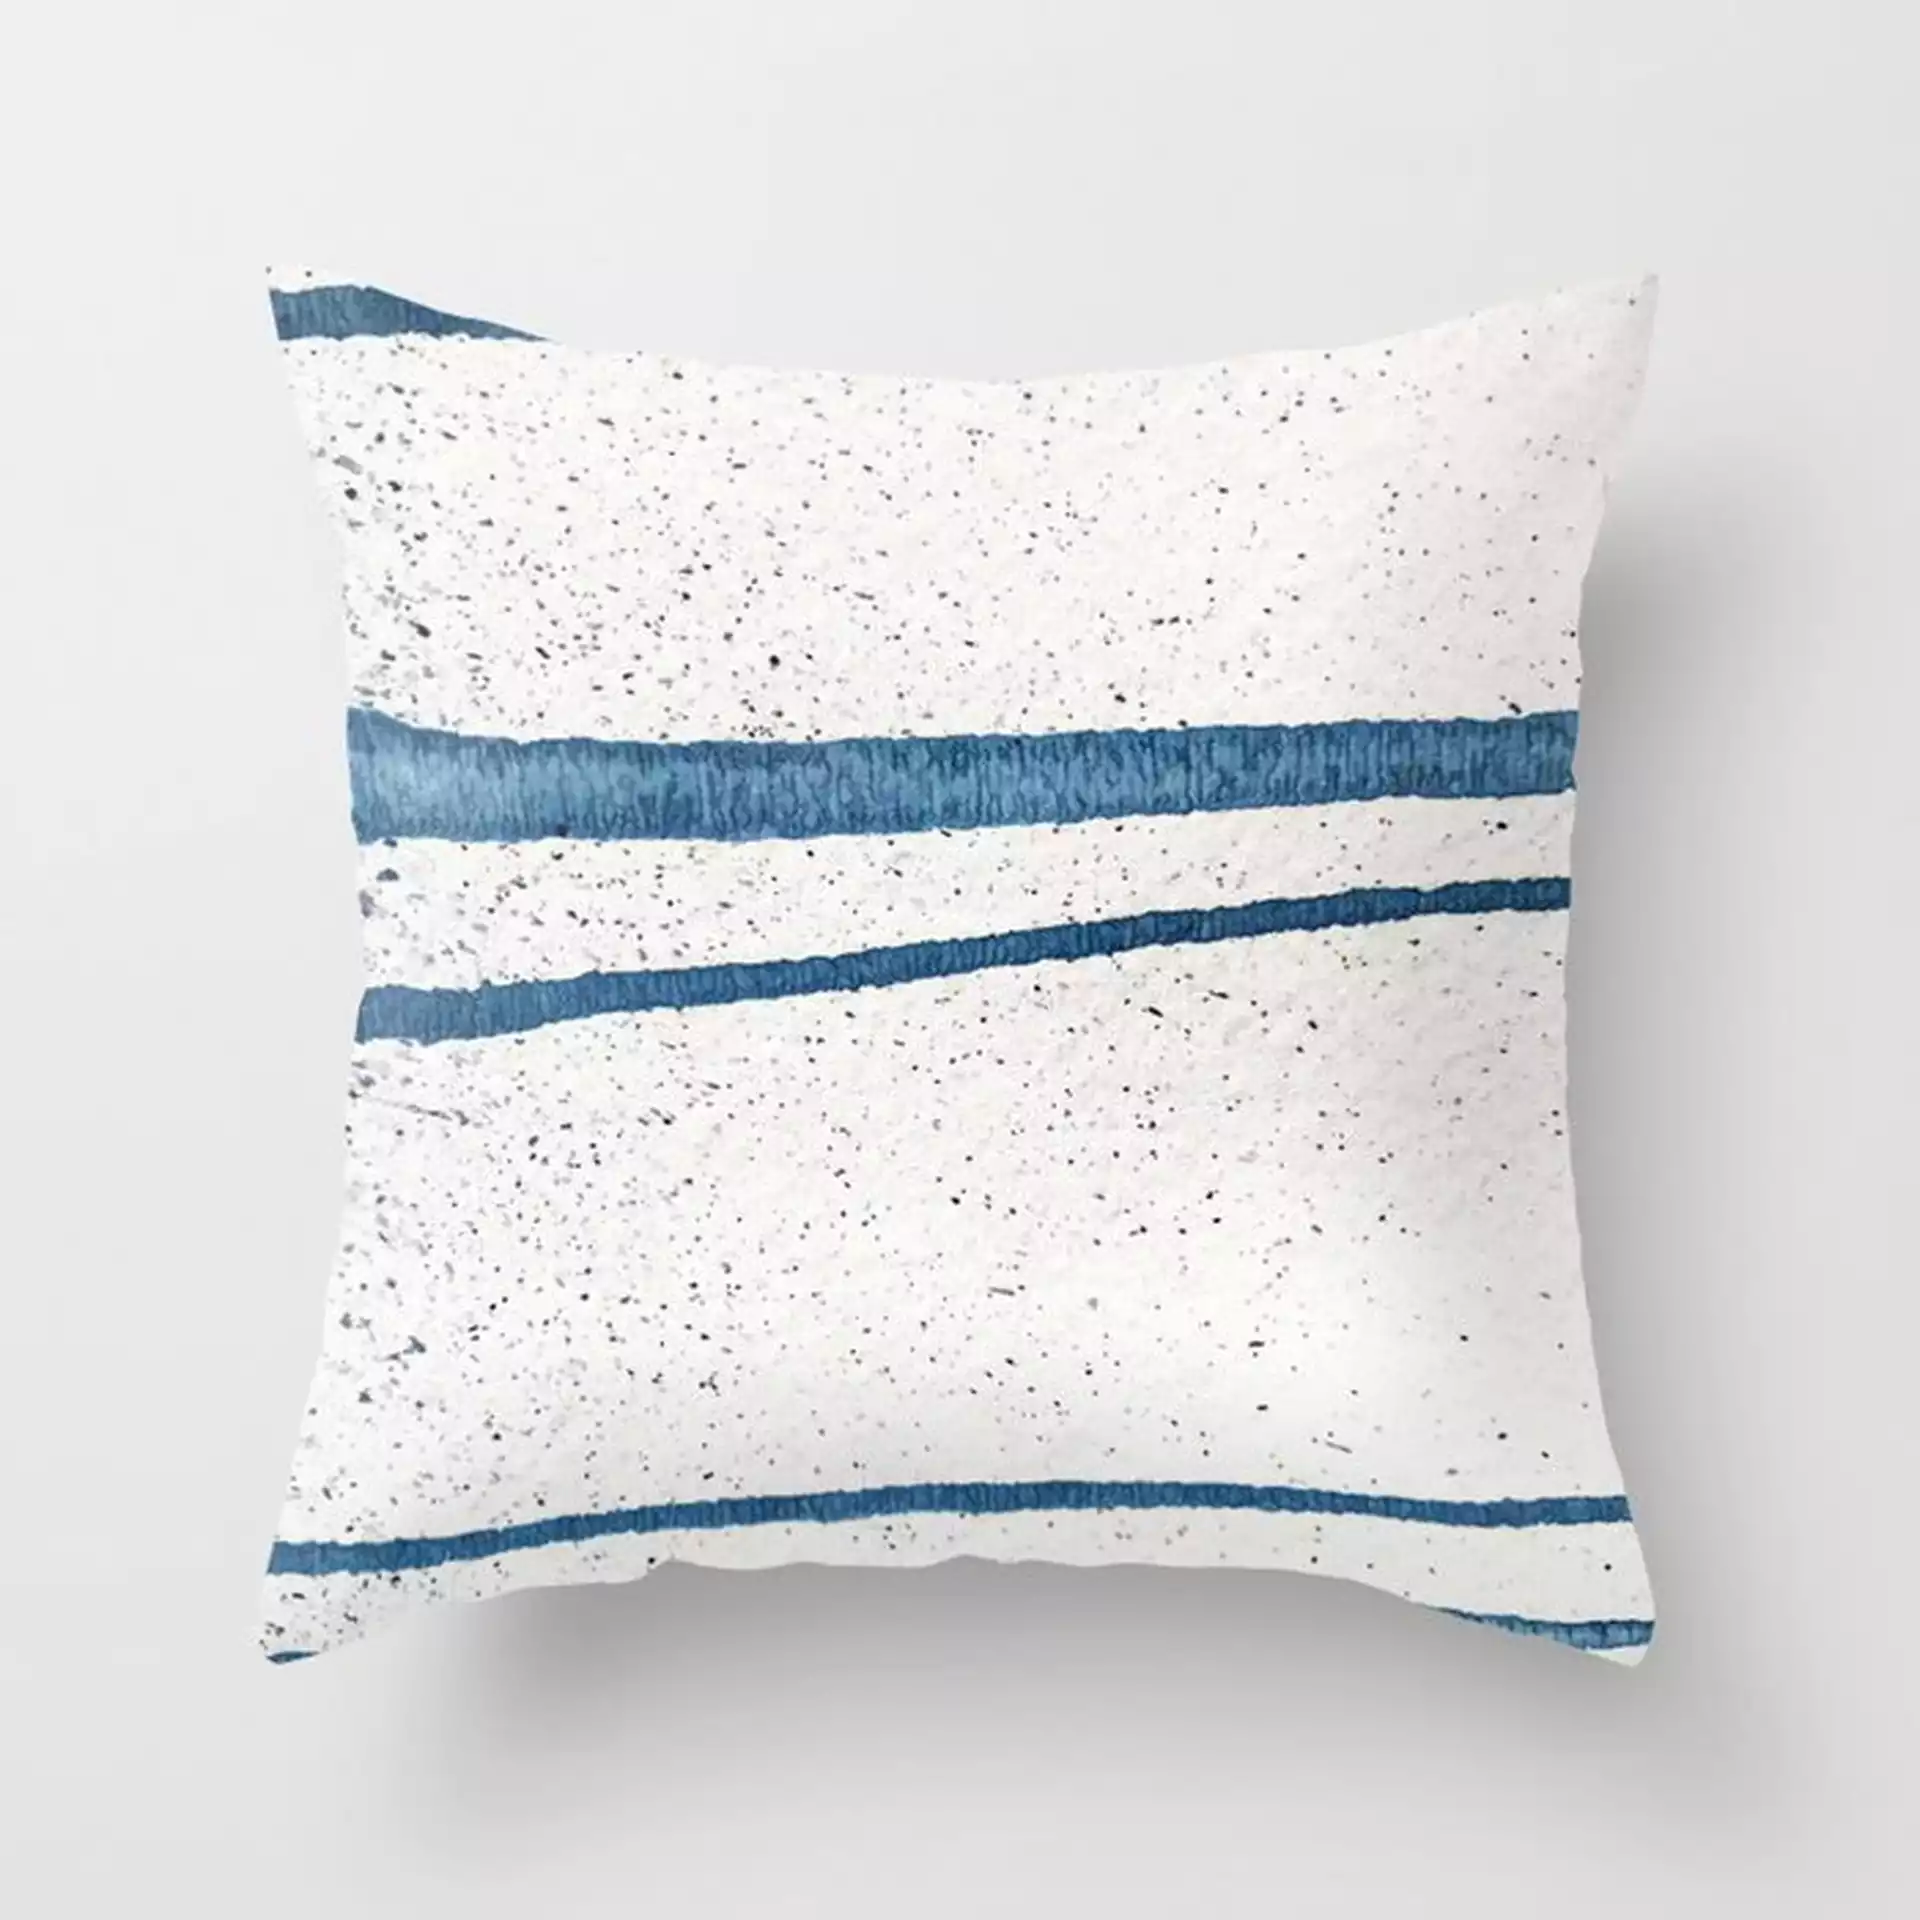 Parallel Universe [horizontal]: A Pretty, Minimal, Abstract Piece In Lines Of Vibrant Blue And White Couch Throw Pillow by Alyssa Hamilton Art - Cover (20" x 20") with pillow insert - Outdoor Pillow